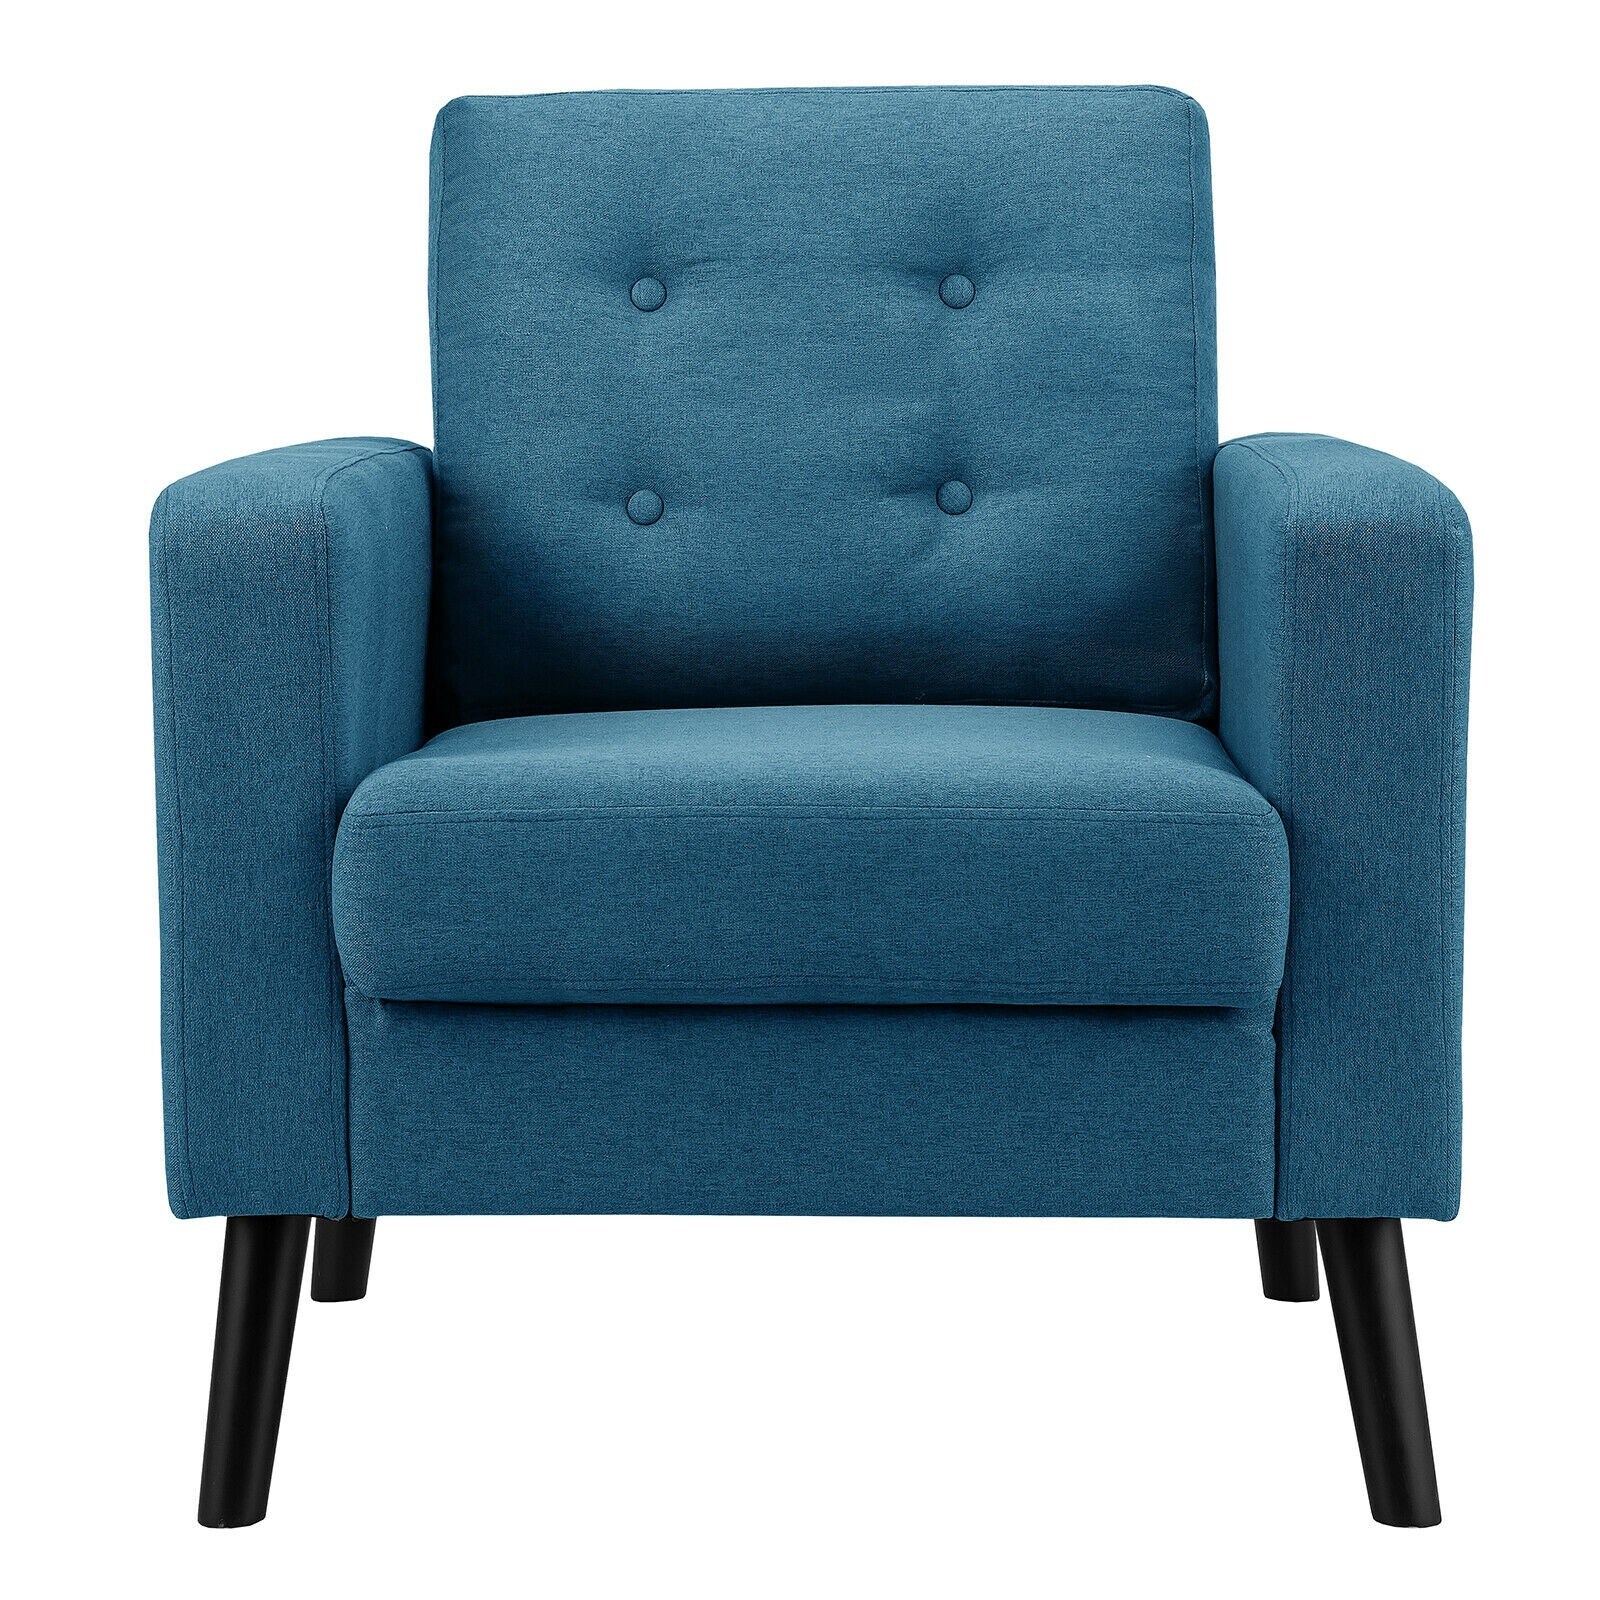 WELLFOR Cy Accent Chairs Casual Blue Linen Accent Chair at Lowes.com